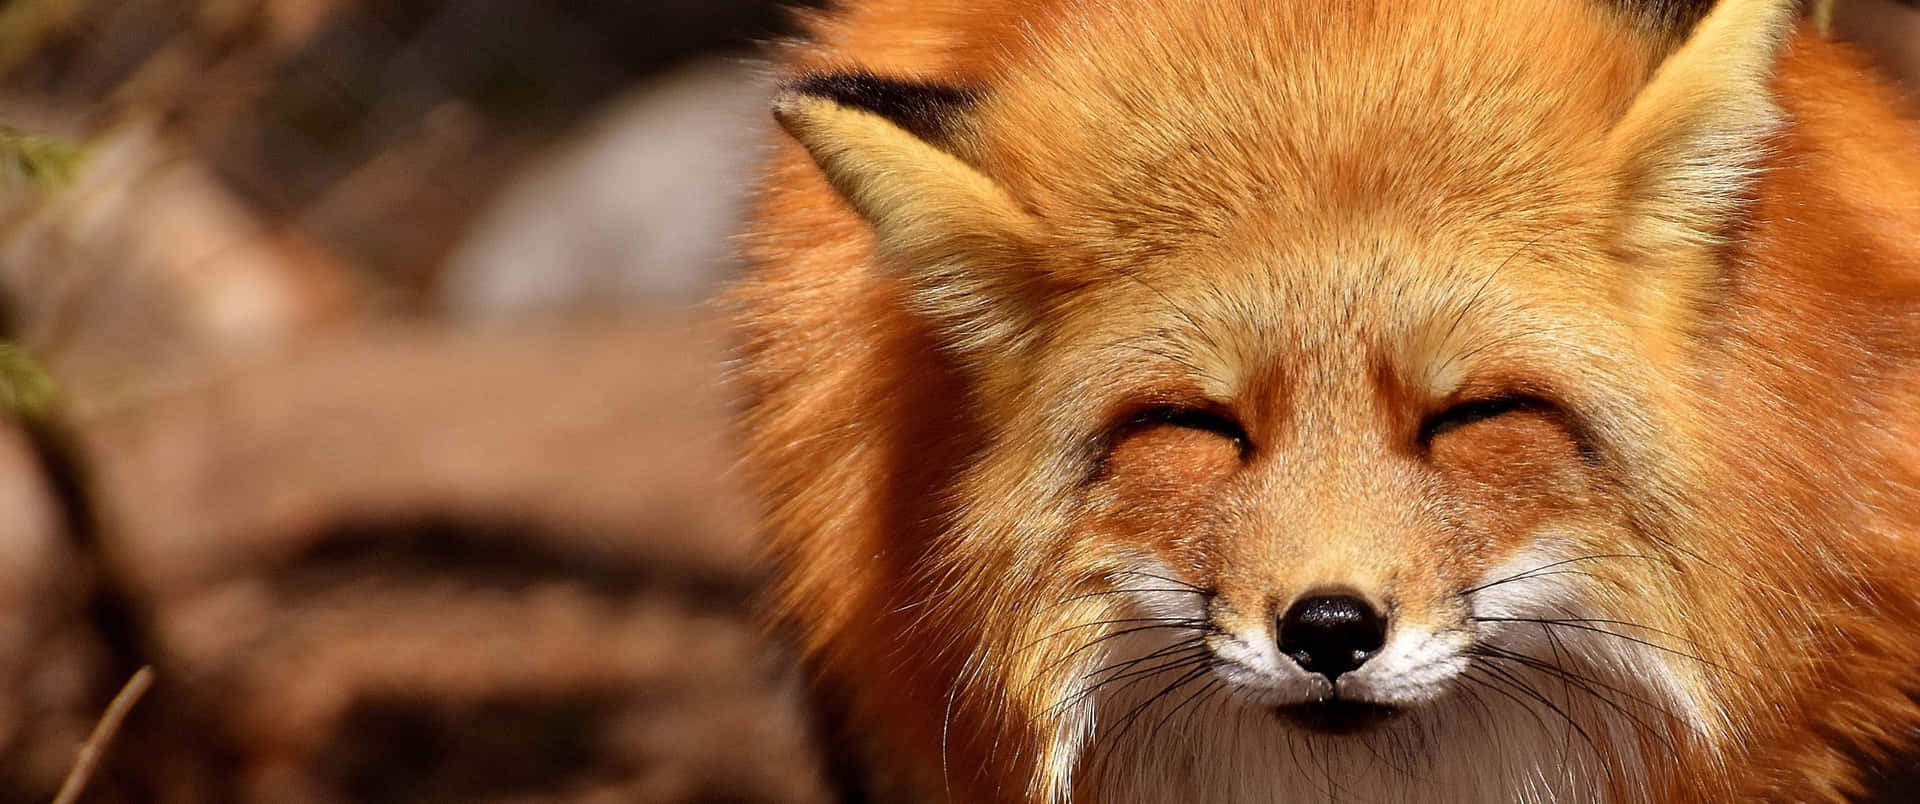 3440x1440 Animal Red Squinting Fox Wallpaper